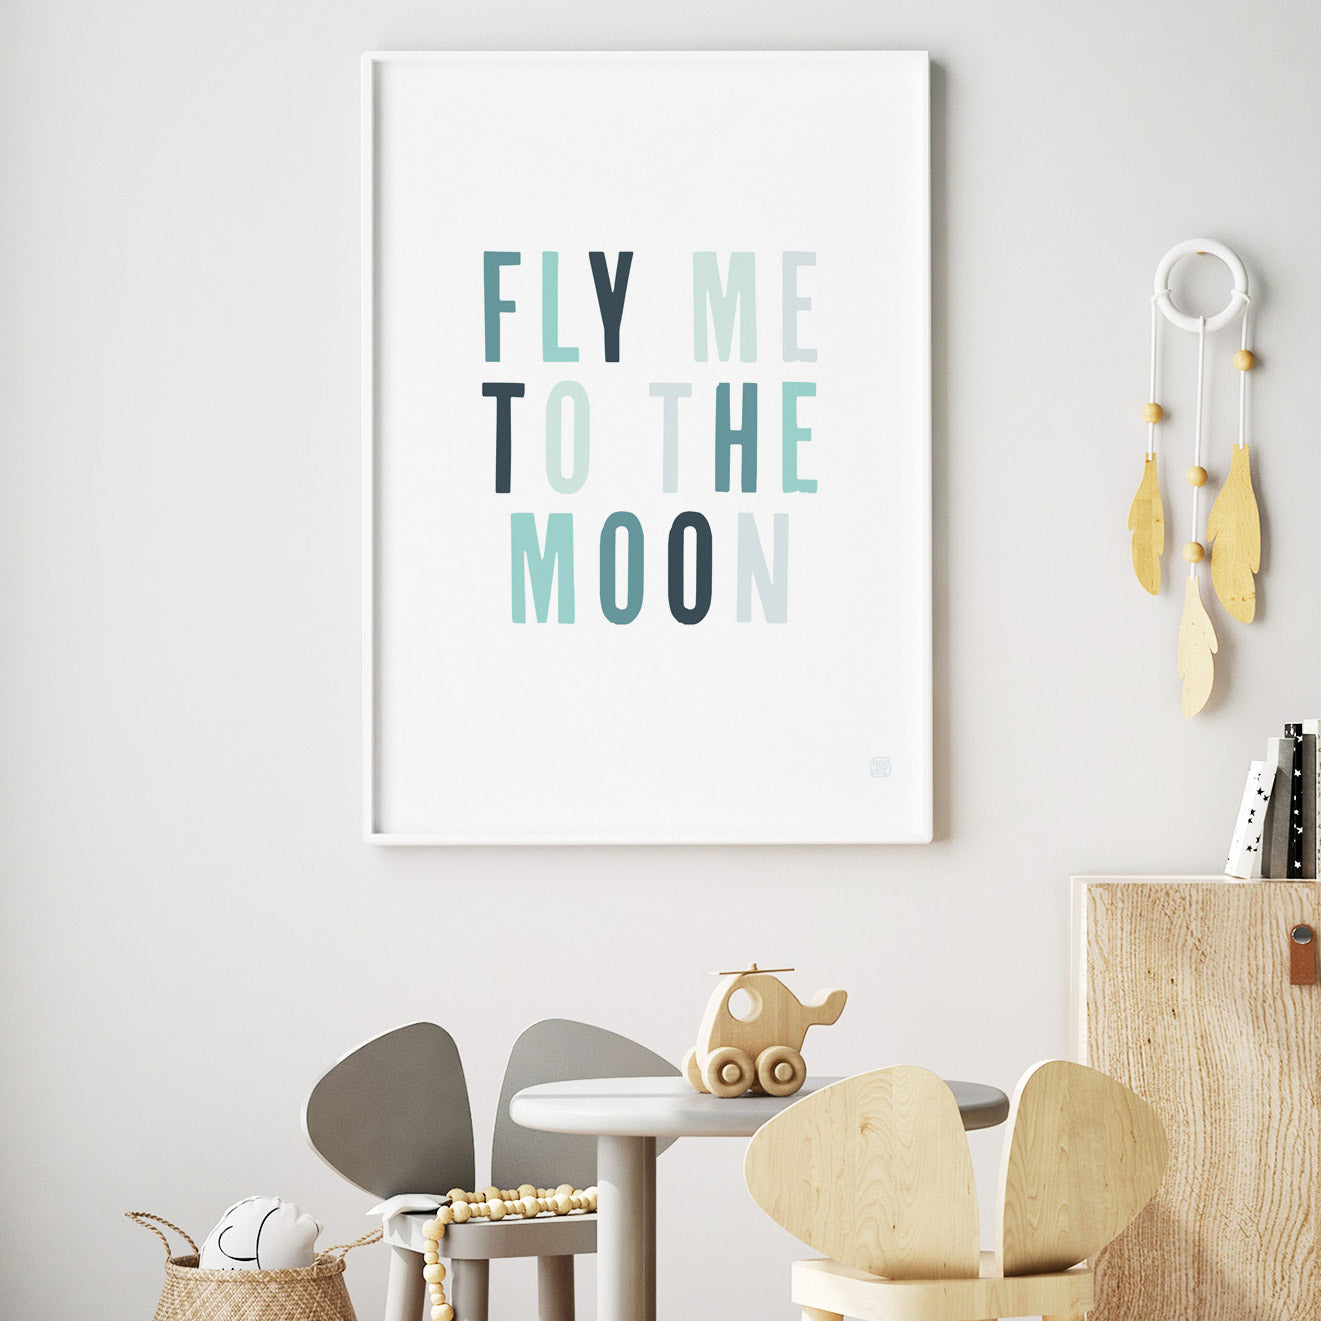 New: Add some words to your walls